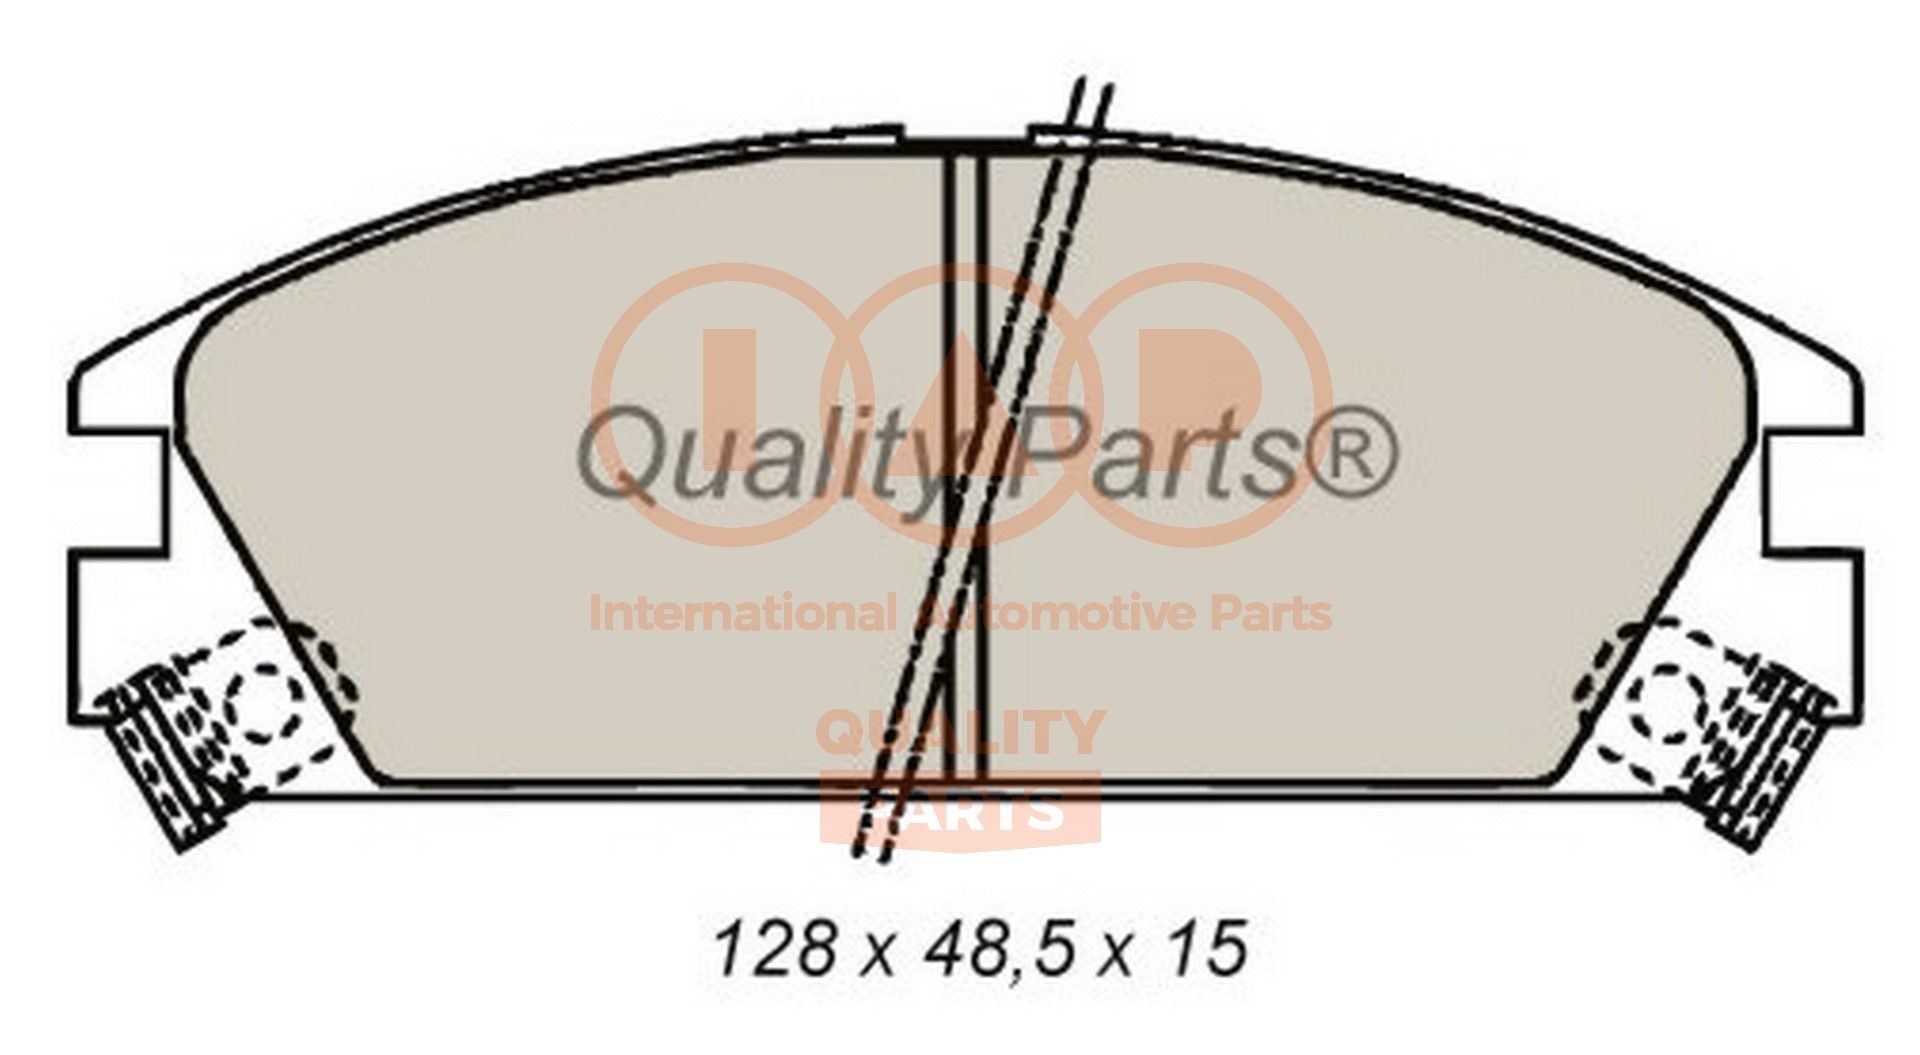 IAP QUALITY PARTS Front Axle Height 1: 48,5mm, Width 1: 128mm, Thickness 1: 15mm Brake pads 704-06030 buy